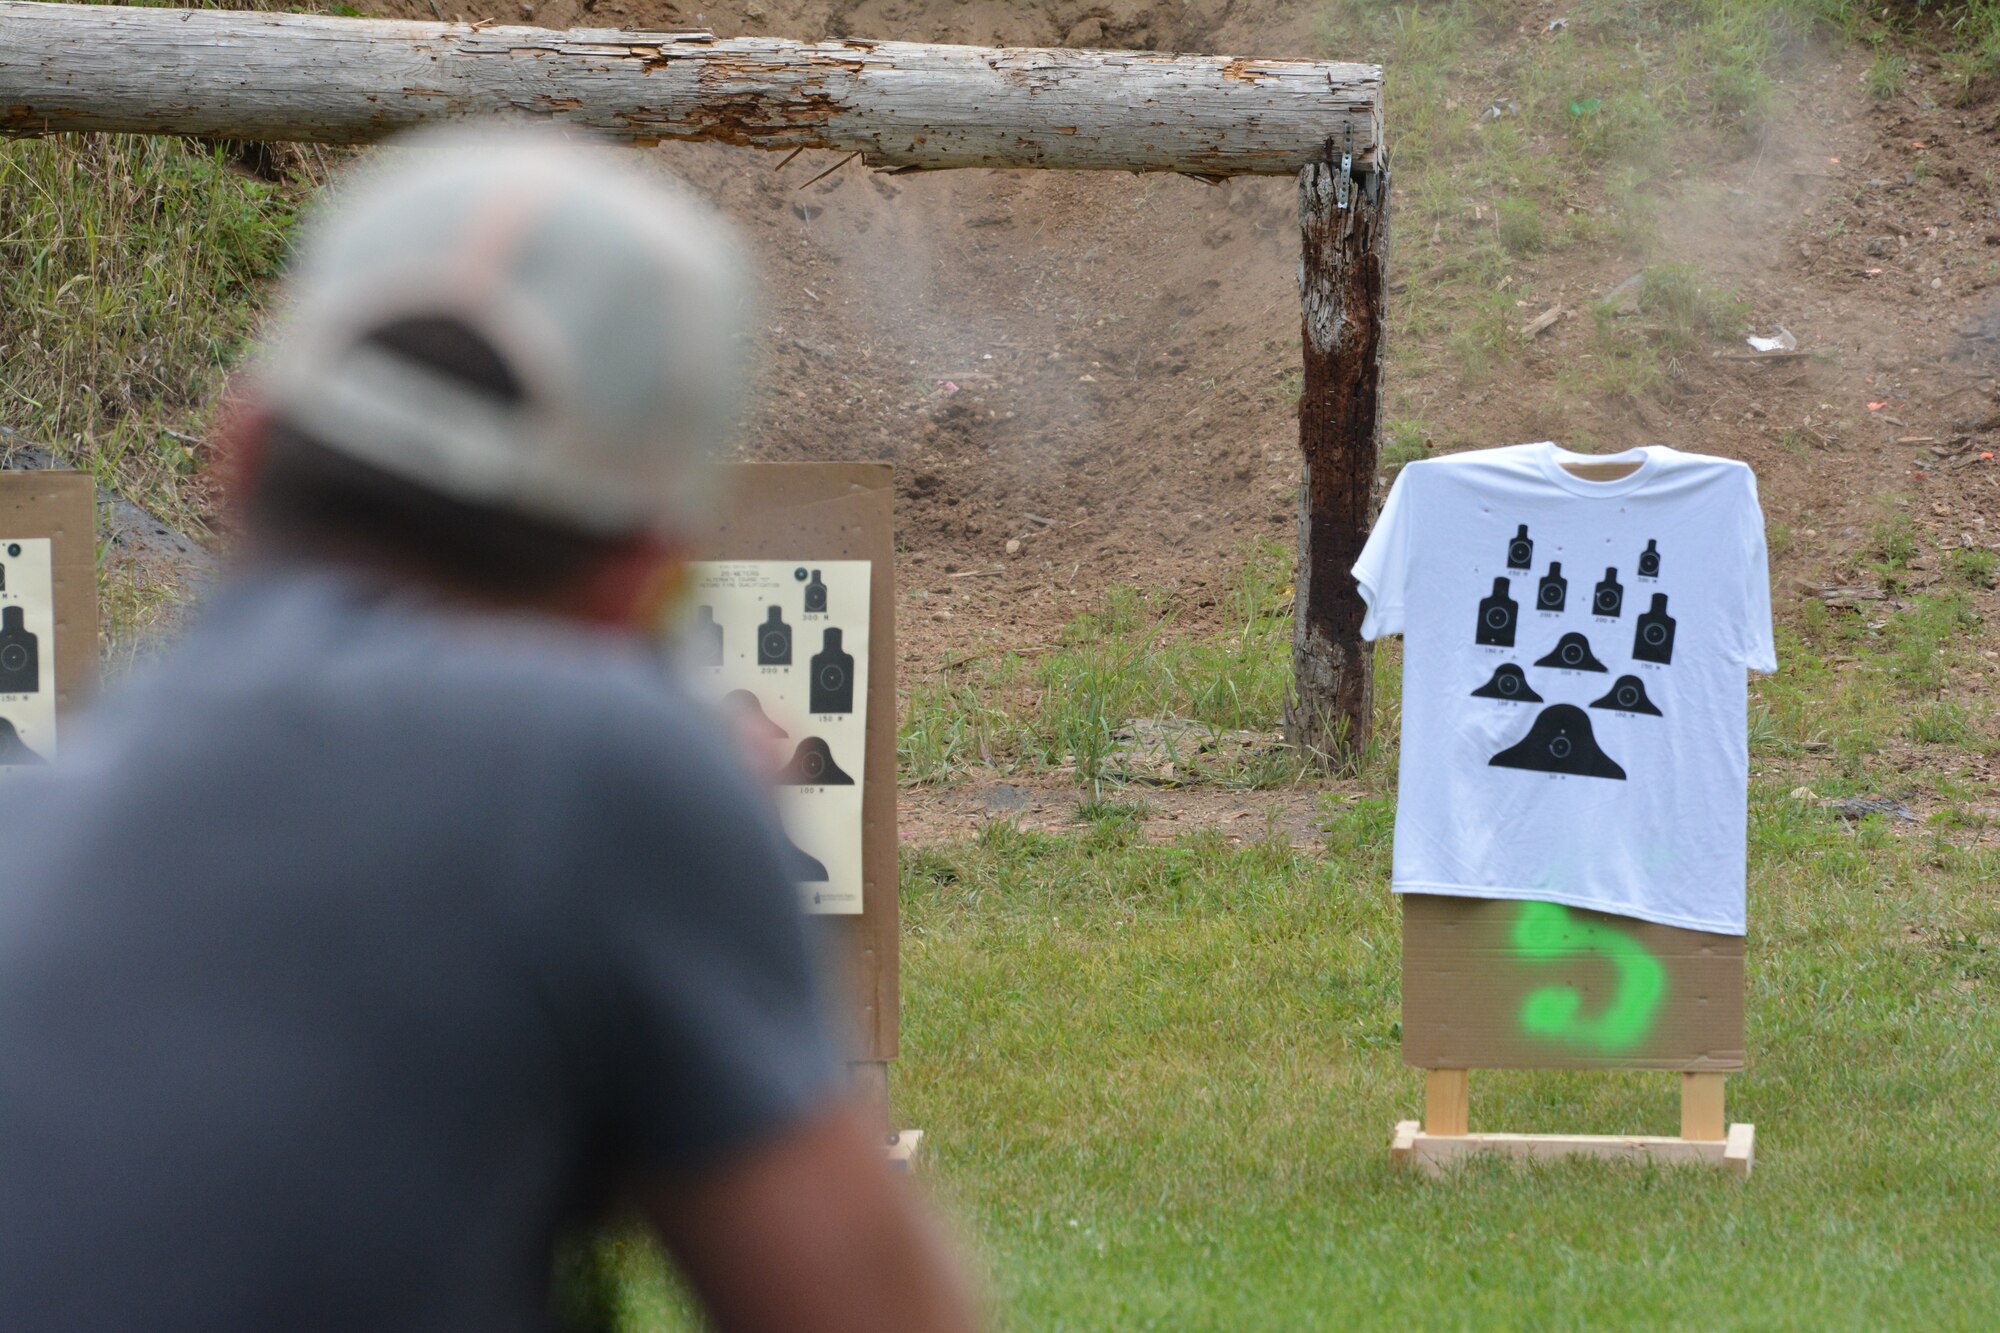 A rifle participant aims at his target during the 2nd Annual Explosive Ordnance Disposal Warrior 3-Gun Shoot at the Deerfield Rod and Gun Club in Deerfield, Wis., July 27, 2013. Attendees could buy t-shirts with smaller targets on them, for a chance to earn more points during the event. Money raised throughout the day was donated to the EOD Warrior Foundation, an organization that supports EOD warriors and their families, and maintains the EOD Memorial. (Air National Guard photo by Senior Airman Andrea F. Liechti)